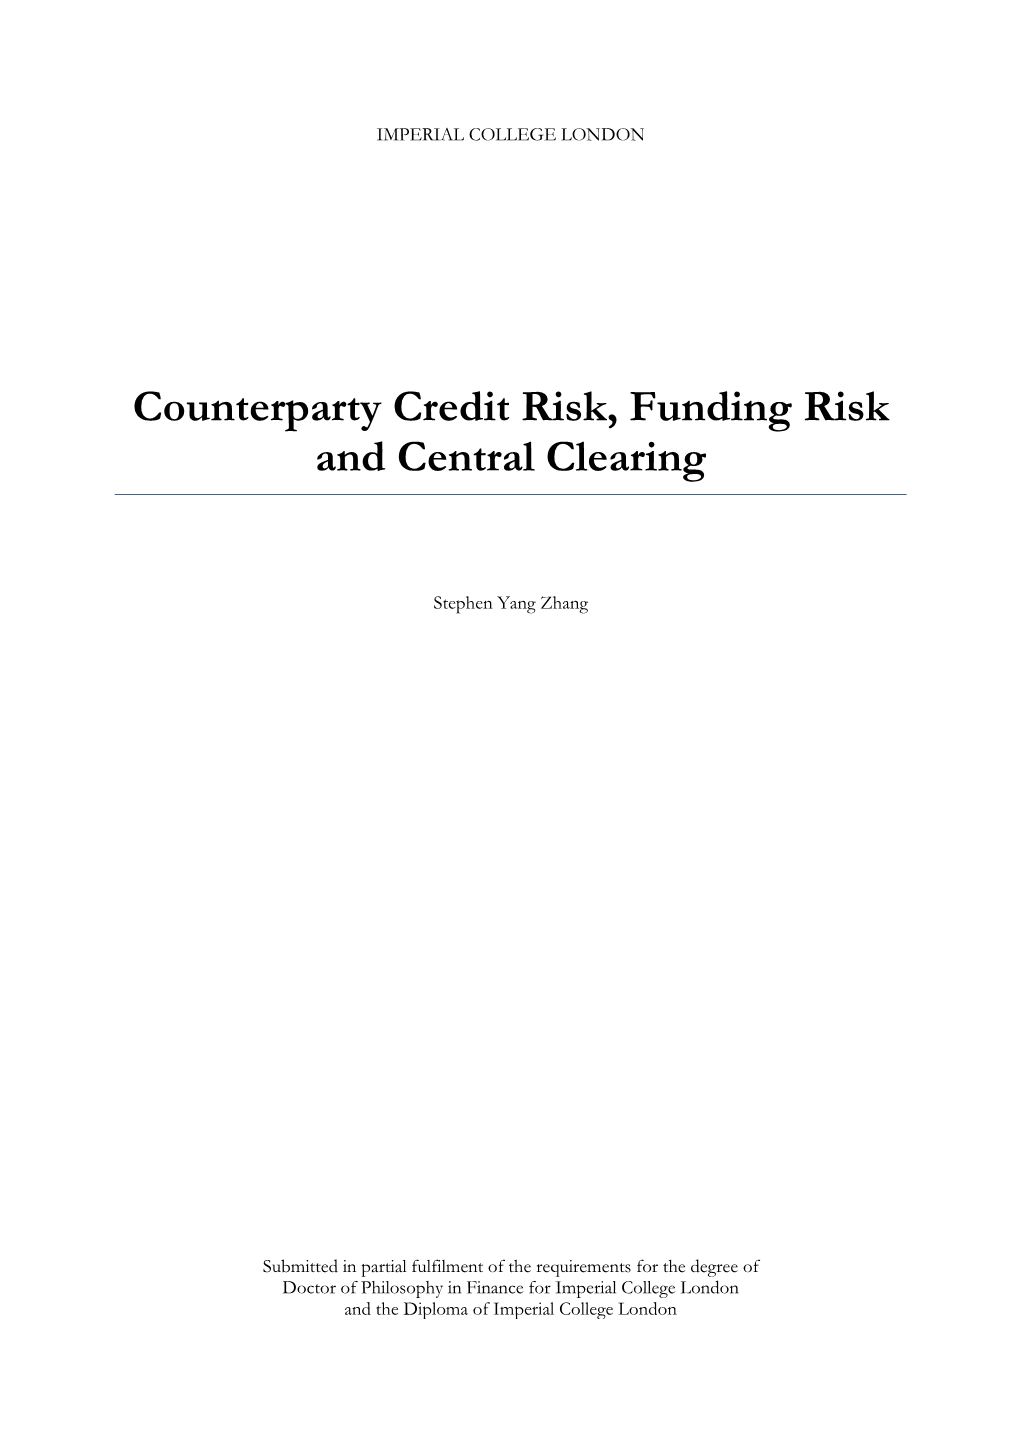 Counterparty Credit Risk, Funding Risk and Central Clearing